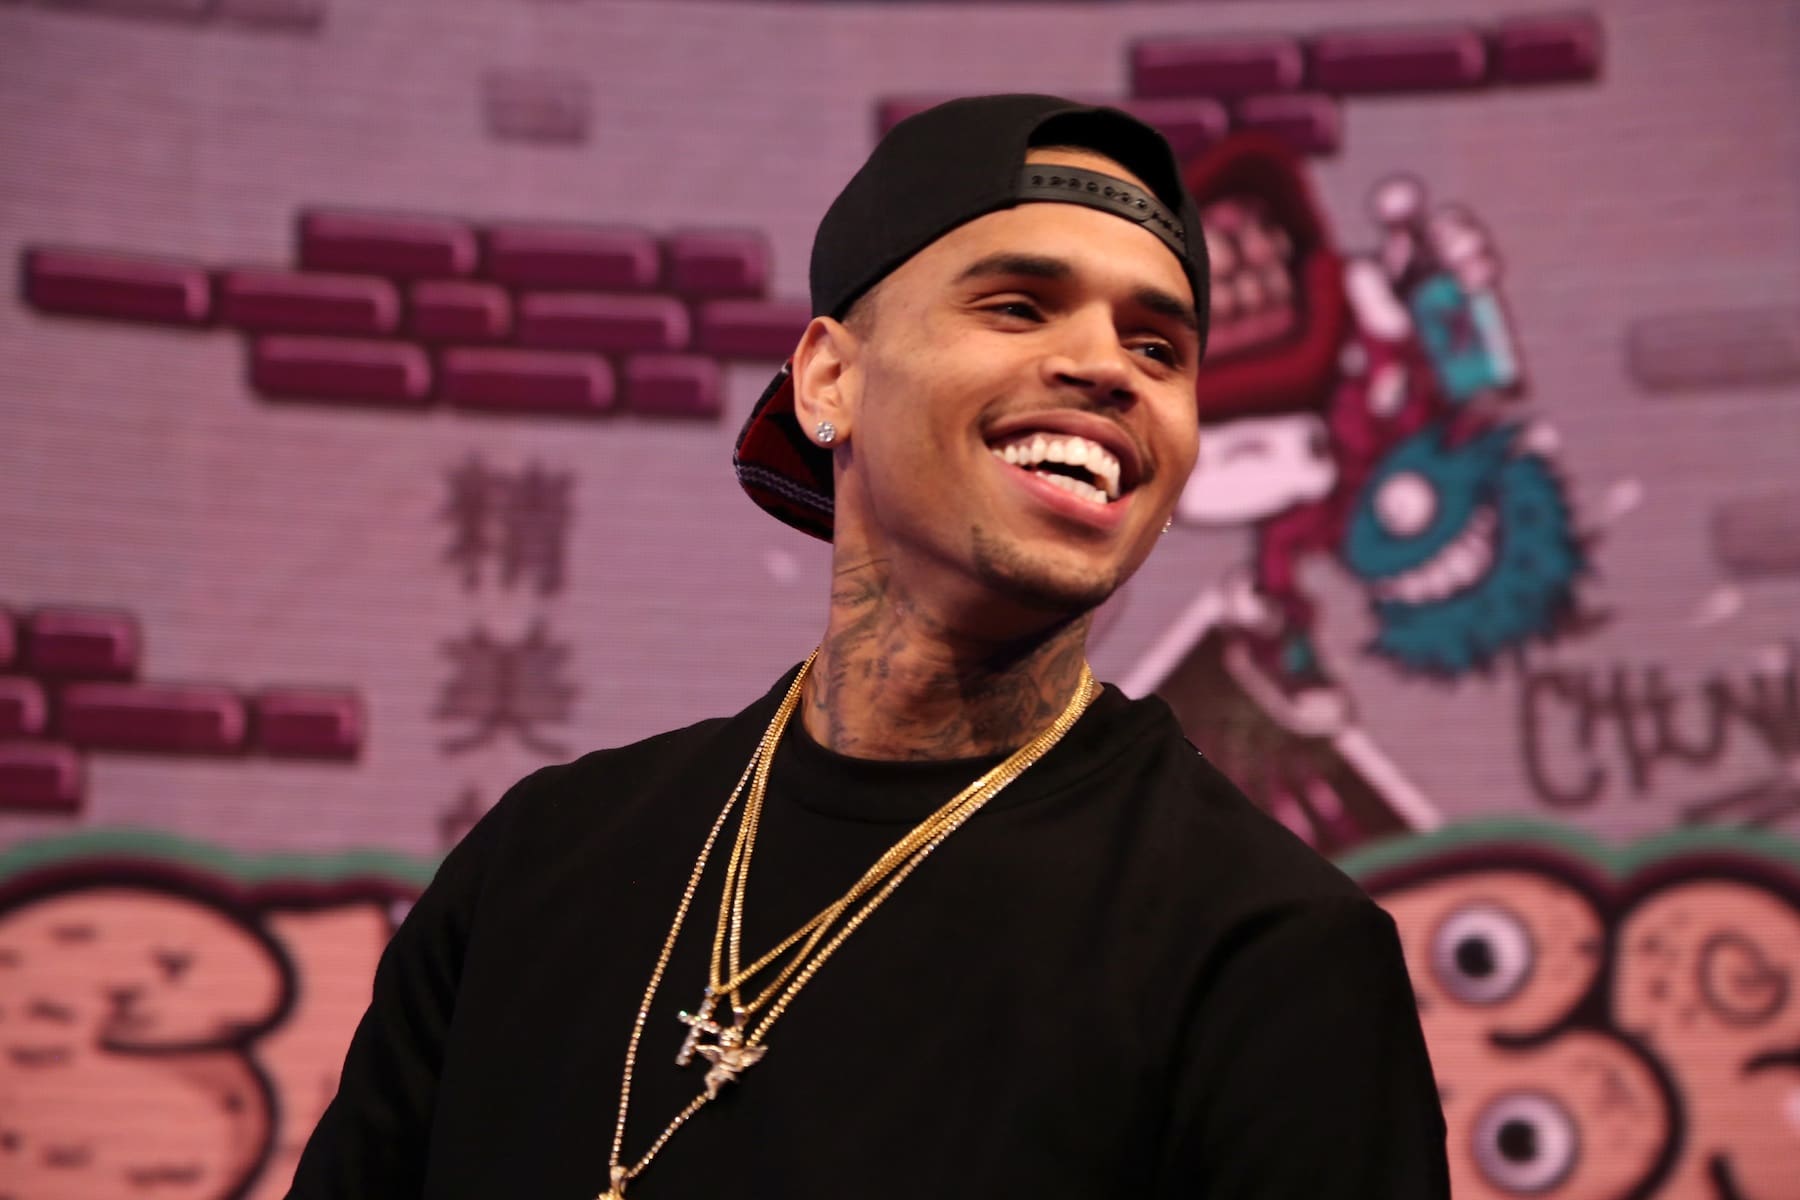 Chris Brown Loses More Fans As He Continues To Bash His Critics And Challenges Them To Send Pics